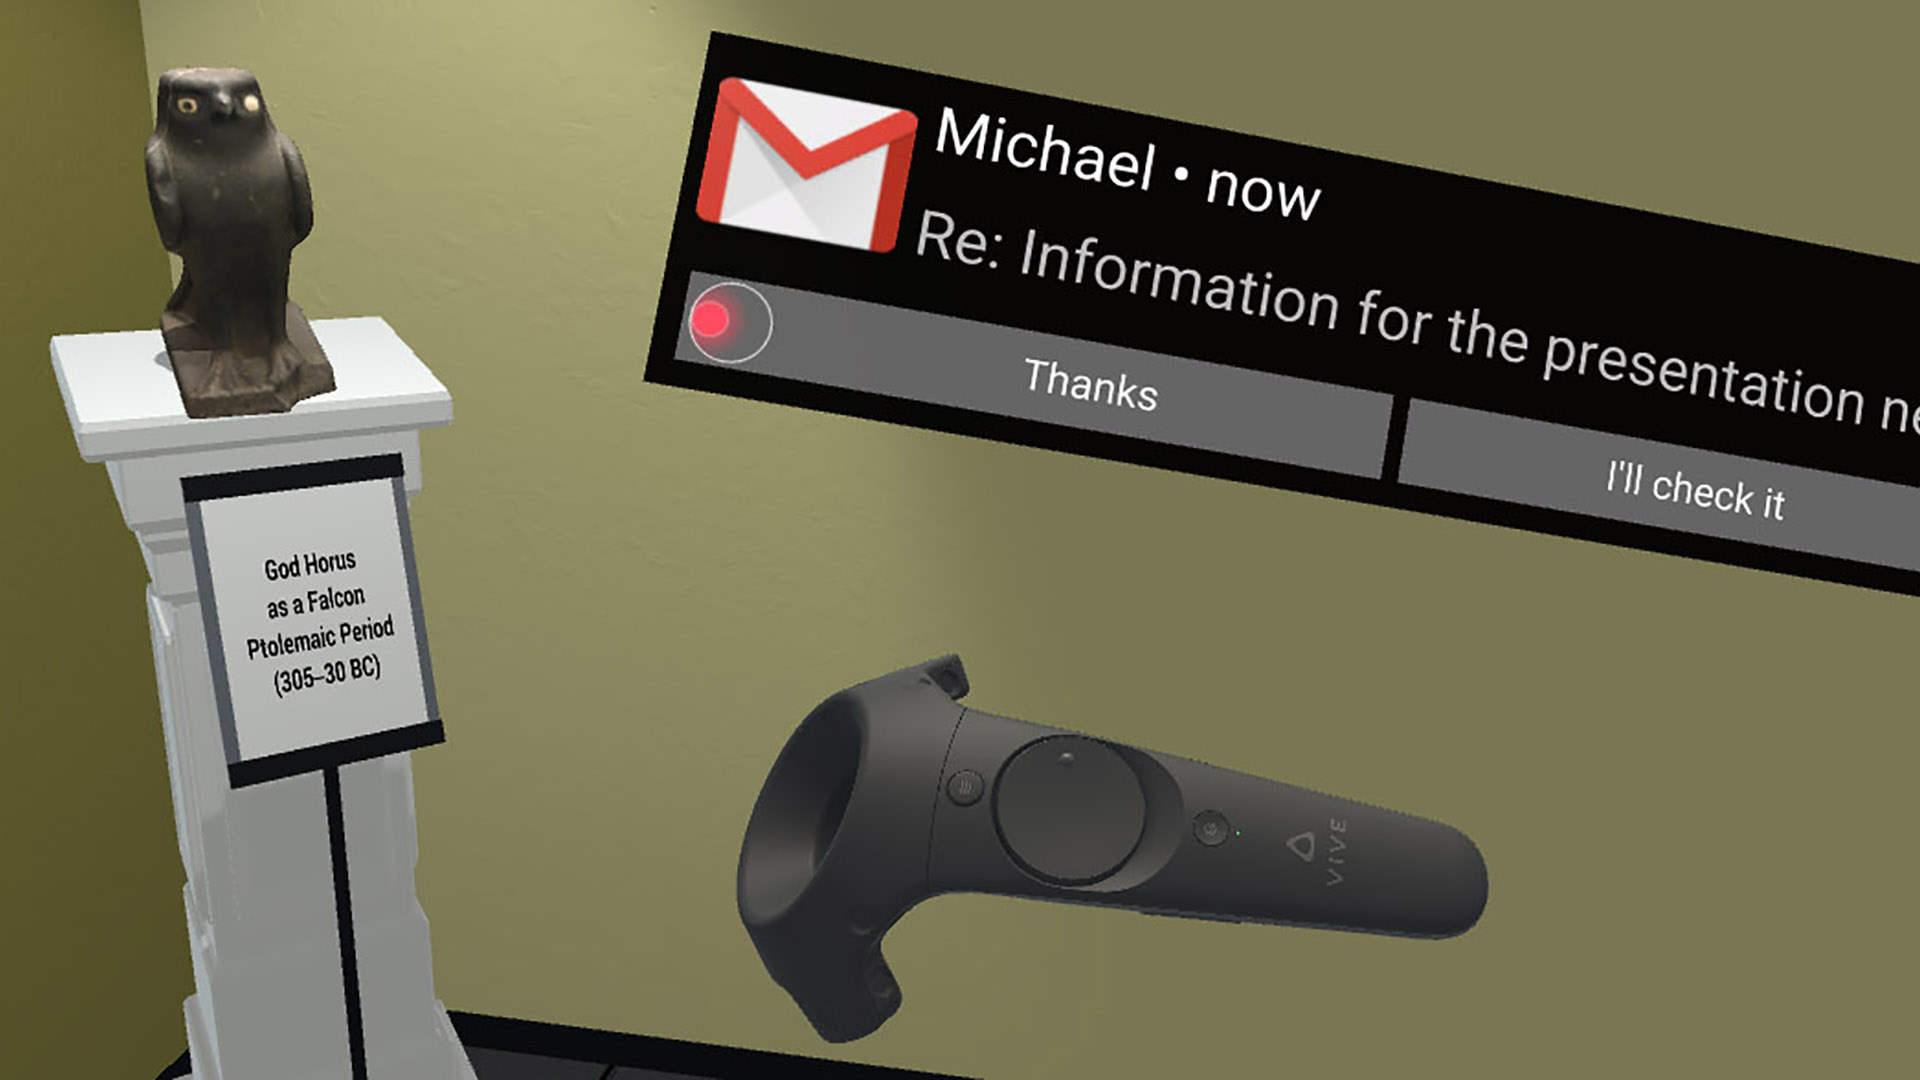 Notification in VR: The Effect of Notification Placement, Task, and Environment